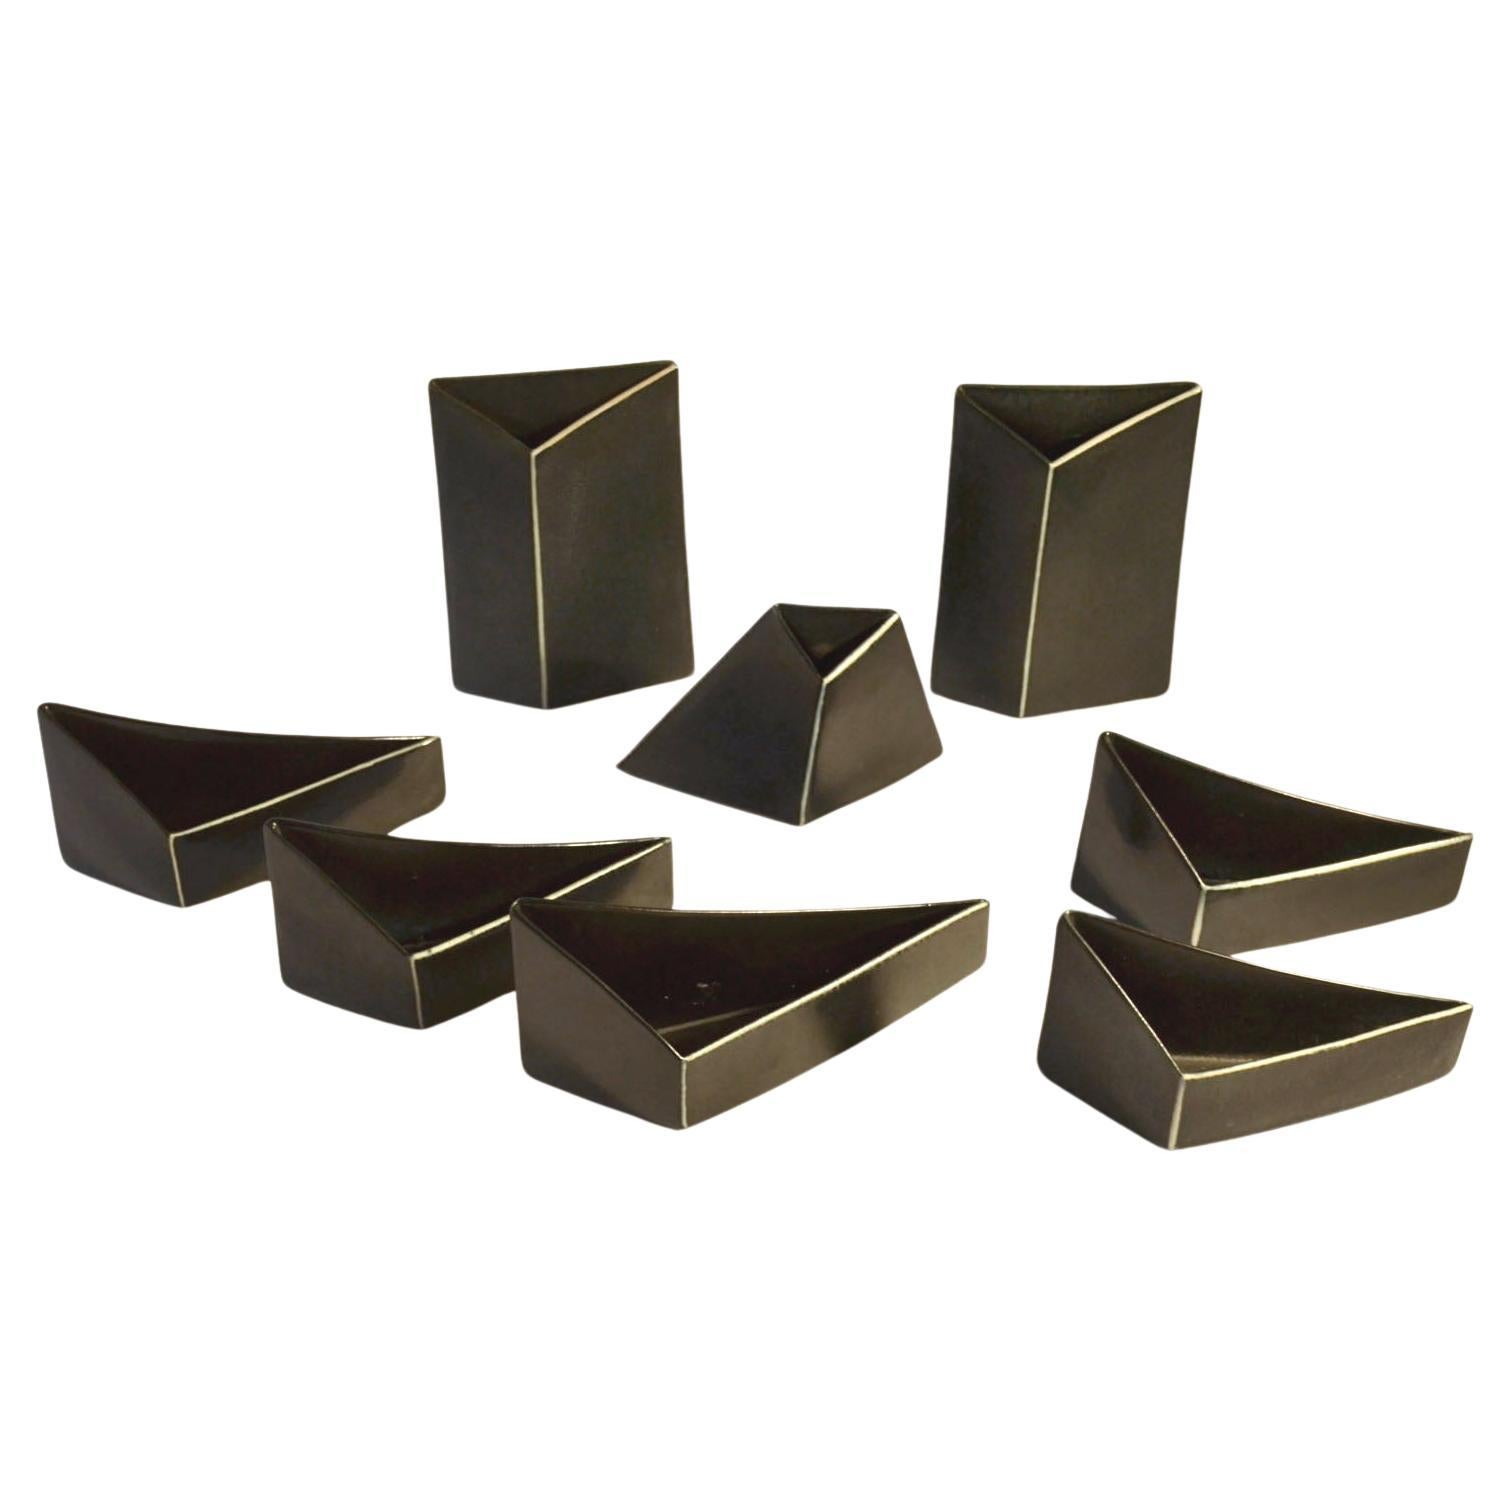 Minimalist Triangular Black and White Ceramic Bowls and Vases For Sale